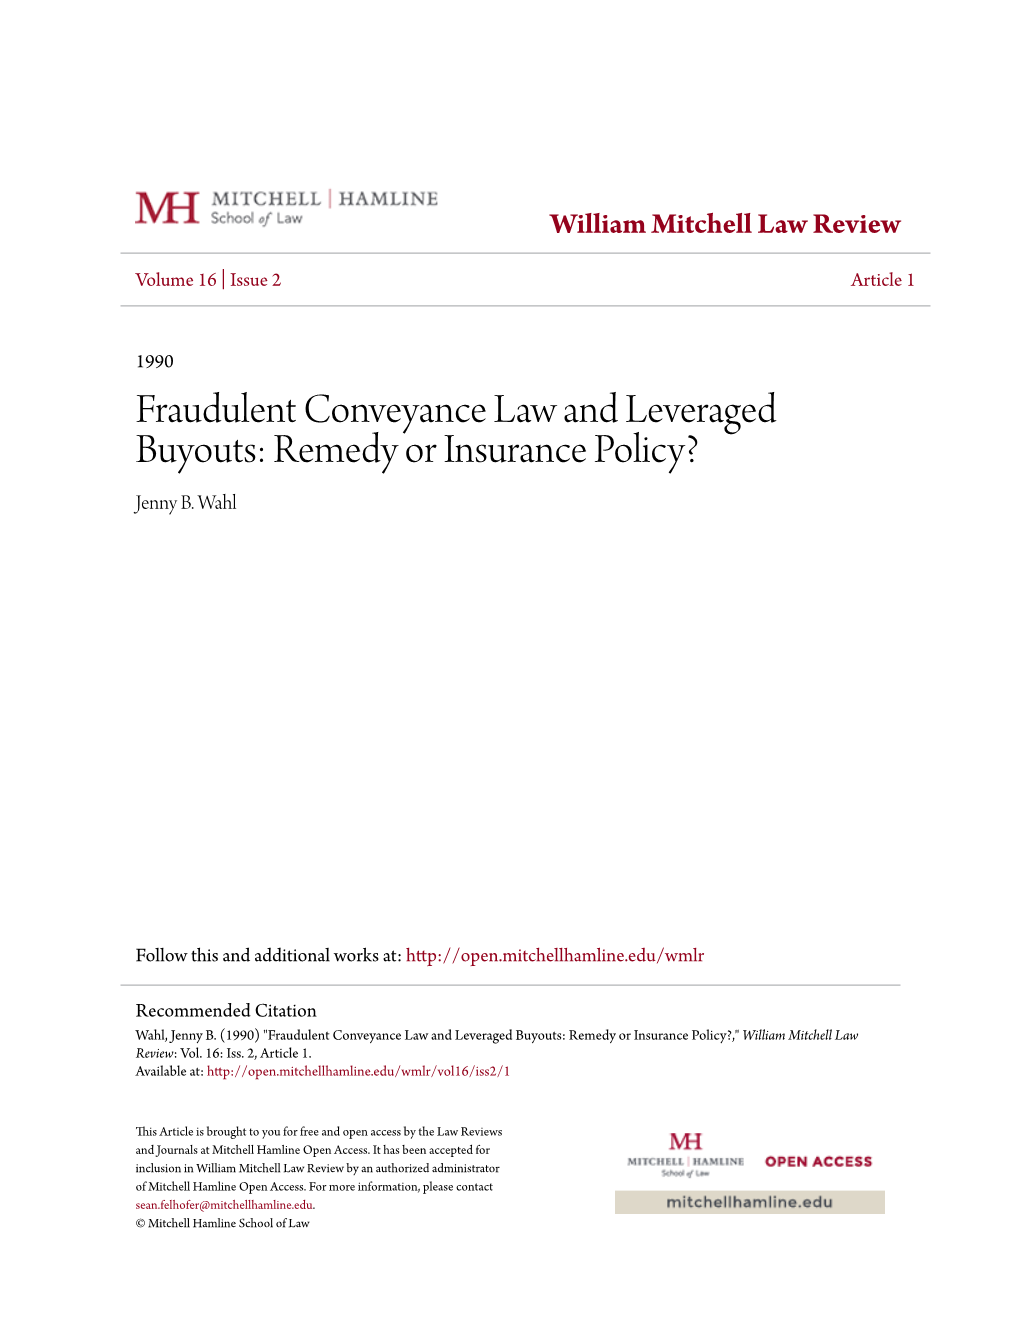 Fraudulent Conveyance Law and Leveraged Buyouts: Remedy Or Insurance Policy? Jenny B